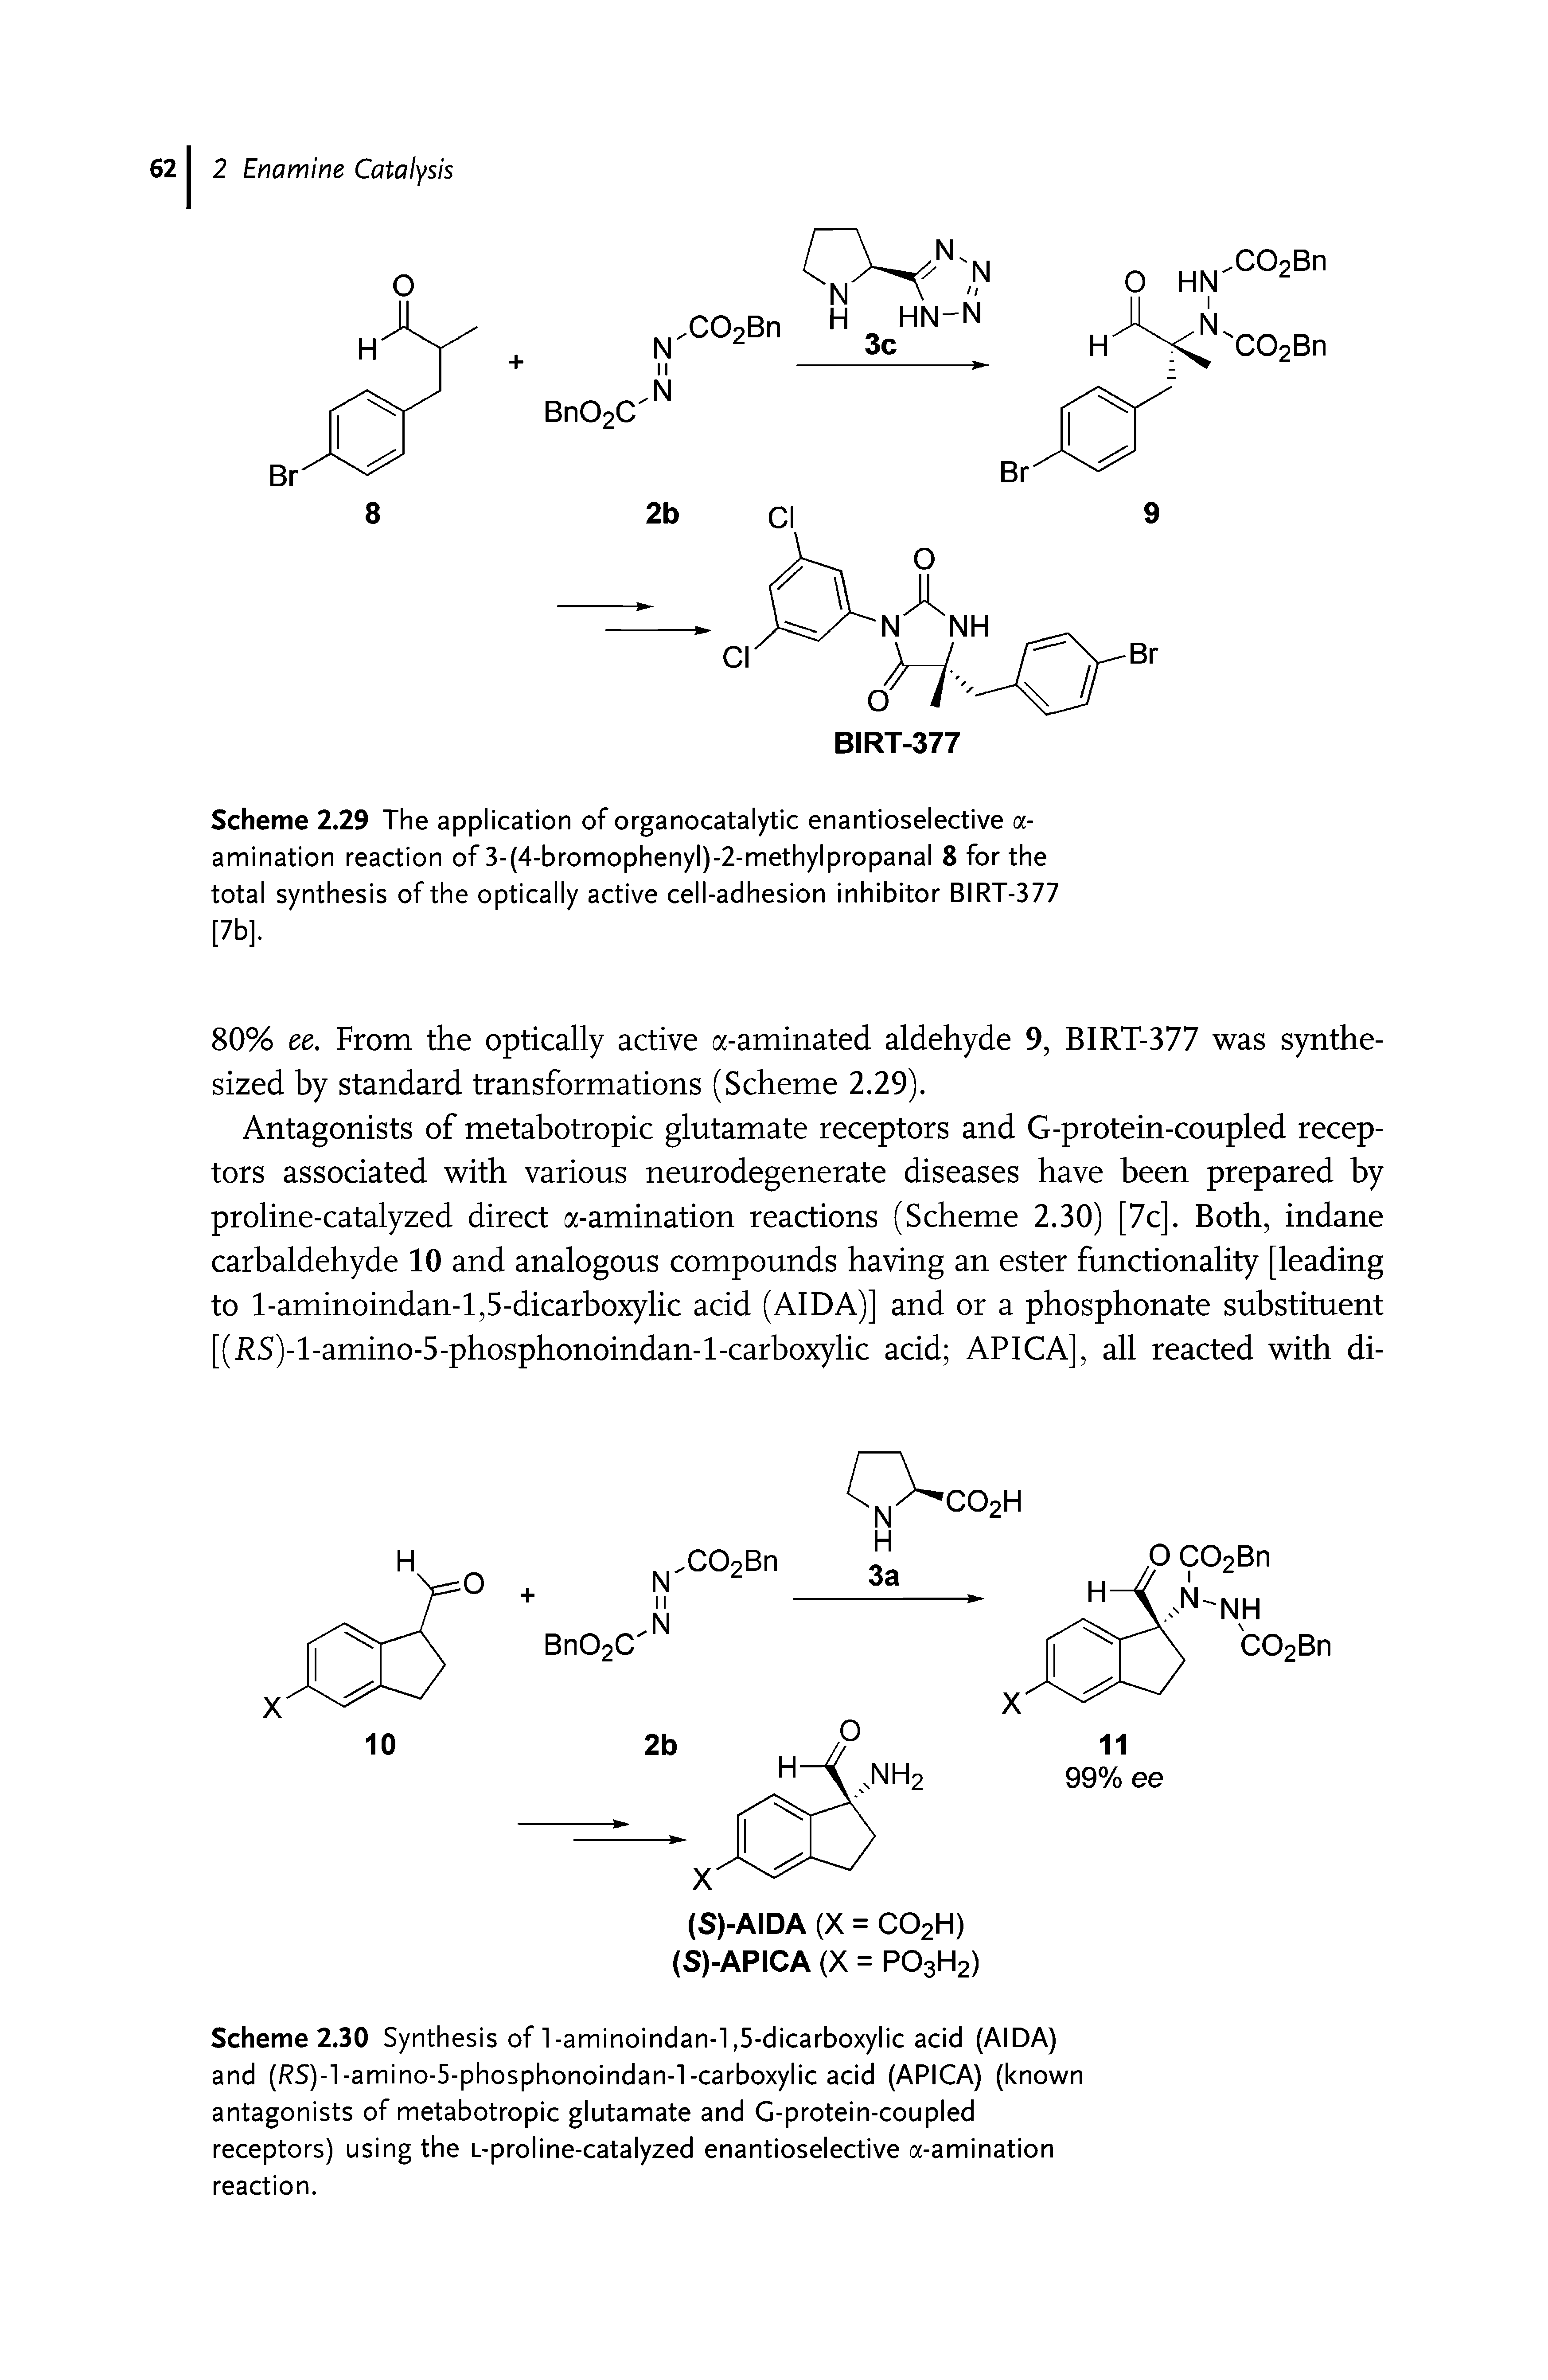 Scheme 2.30 Synthesis of l-aminoindan-l,5-dicarboxylic acid (AIDA) and (/ S)-l-amino-5-phosphonoindan-l-carboxylic acid (APICA) (known antagonists of metabotropic glutamate and G-protein-coupled receptors) using the L-proline-catalyzed enantioselective a-amination reaction.